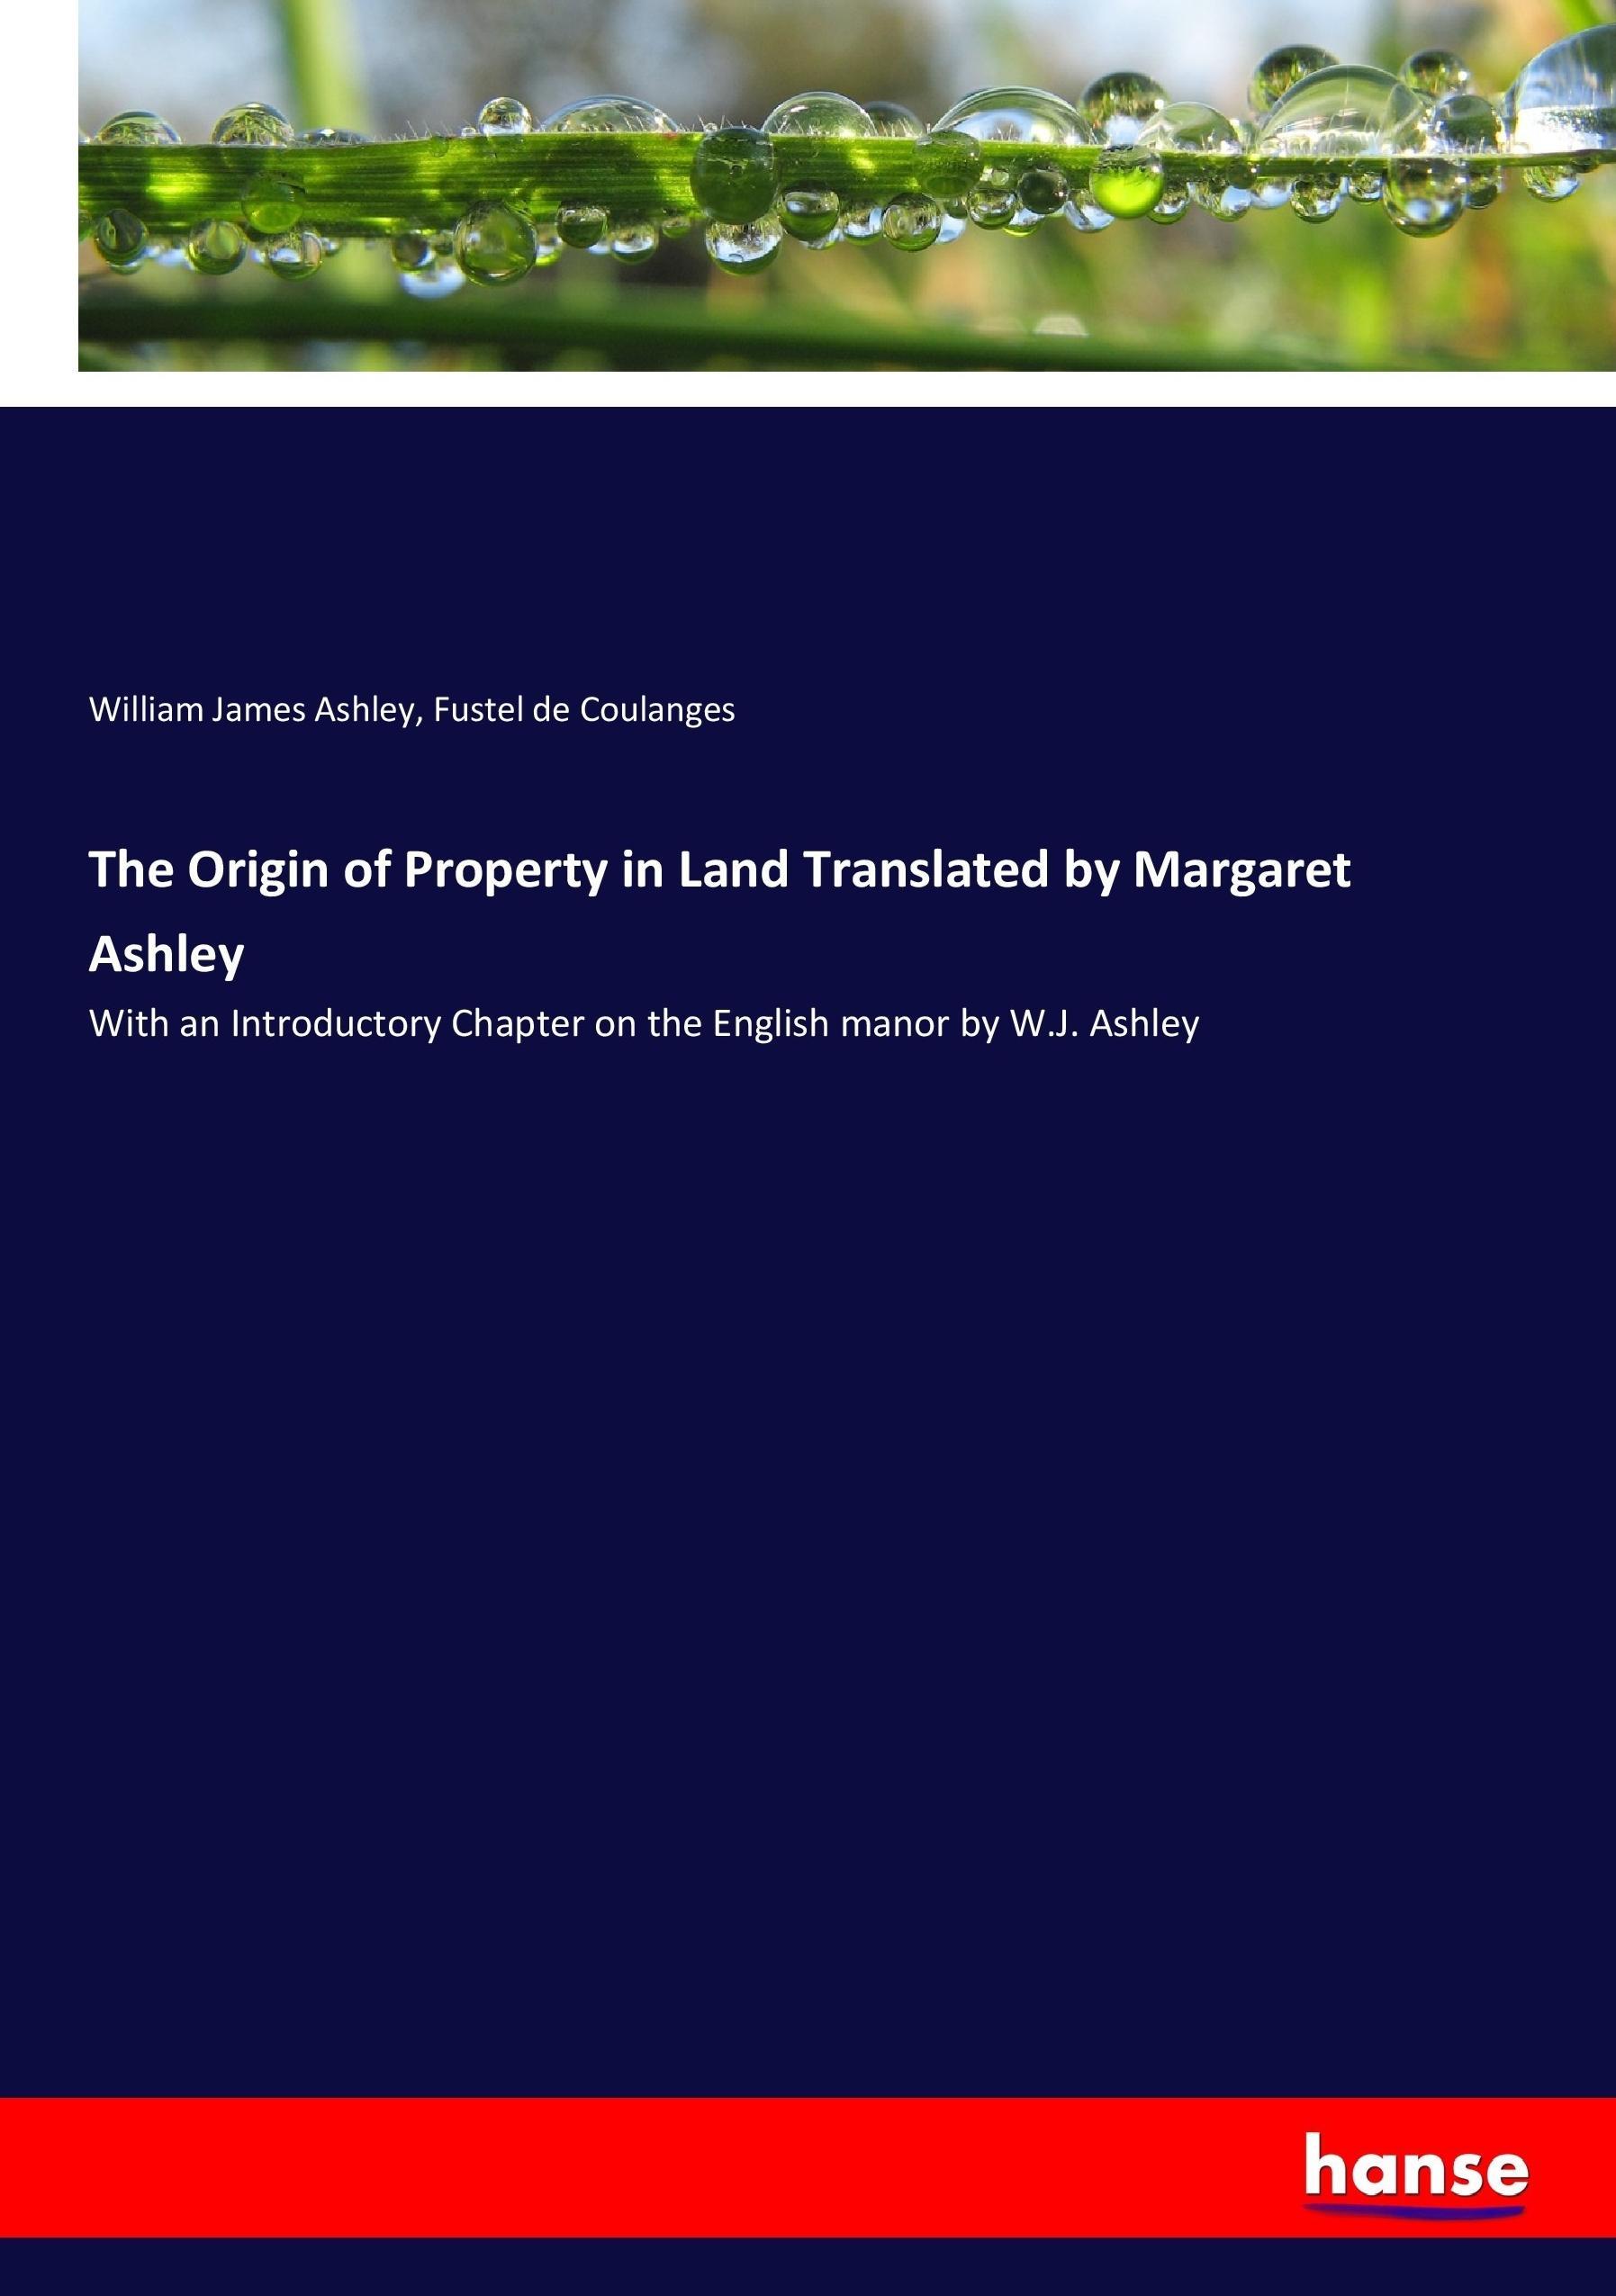 The Origin of Property in Land Translated by Margaret Ashley - Ashley, William James Coulanges, Fustel de